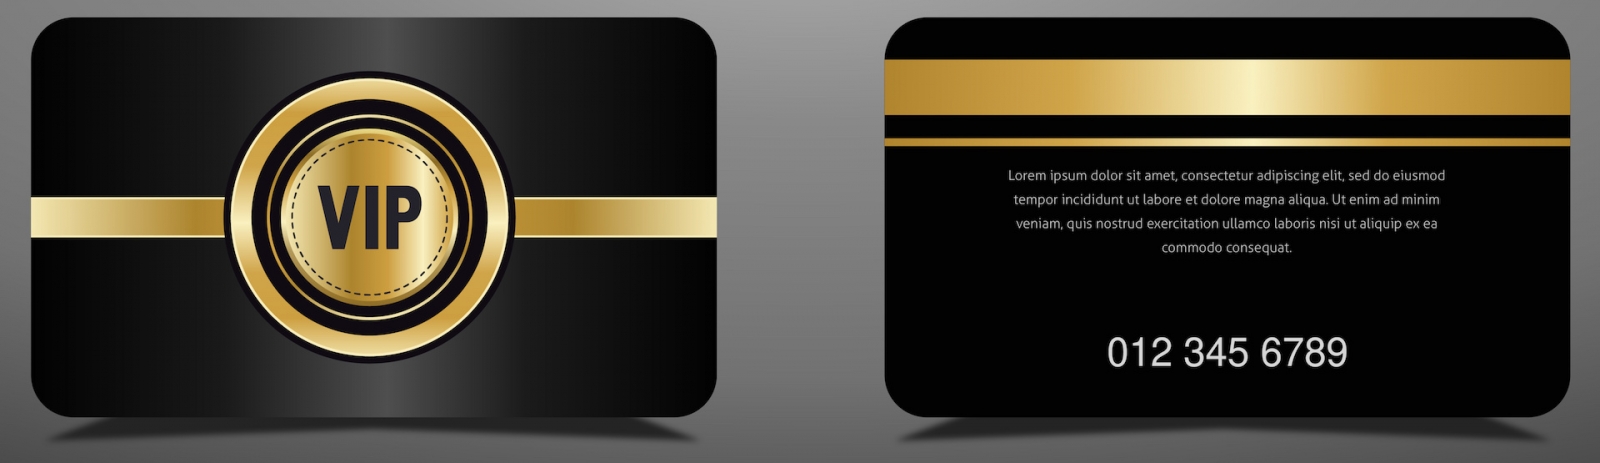 luxury gold vip card and elegant black background, luxury design for vip members.